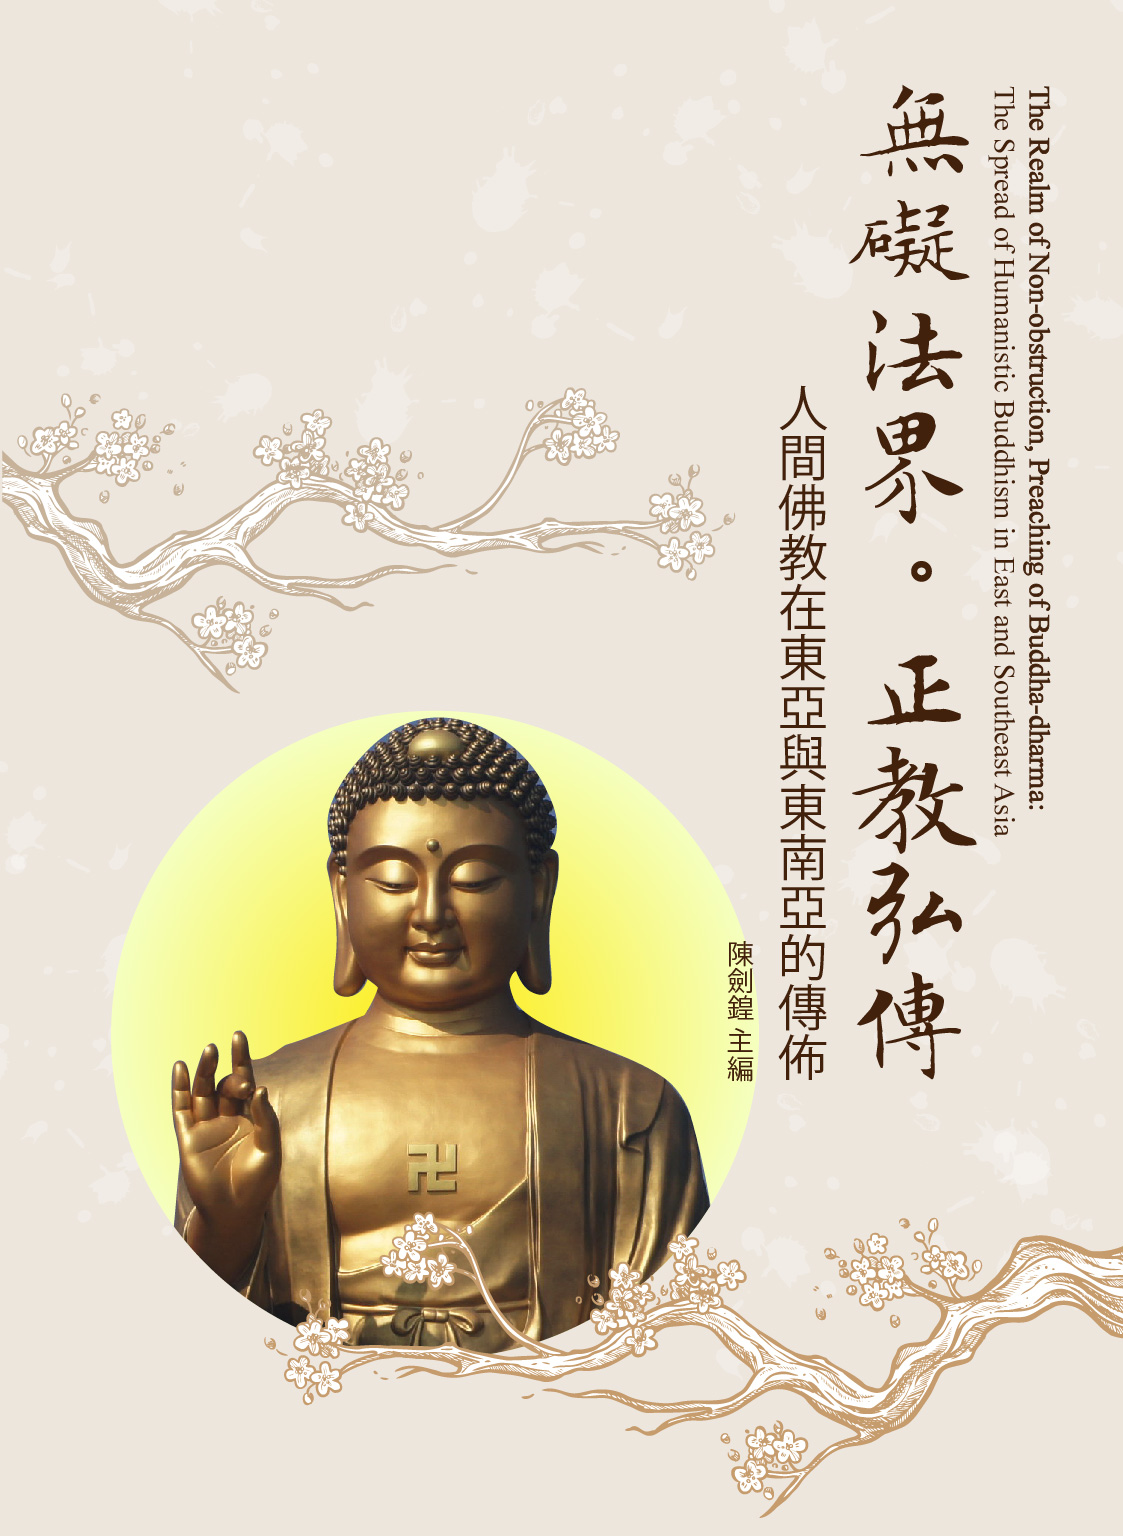 The Realm of Non-obstruction, Preaching of Buddha-dharma: The Spread of Humanistic Buddhism in East and Southeast Asia